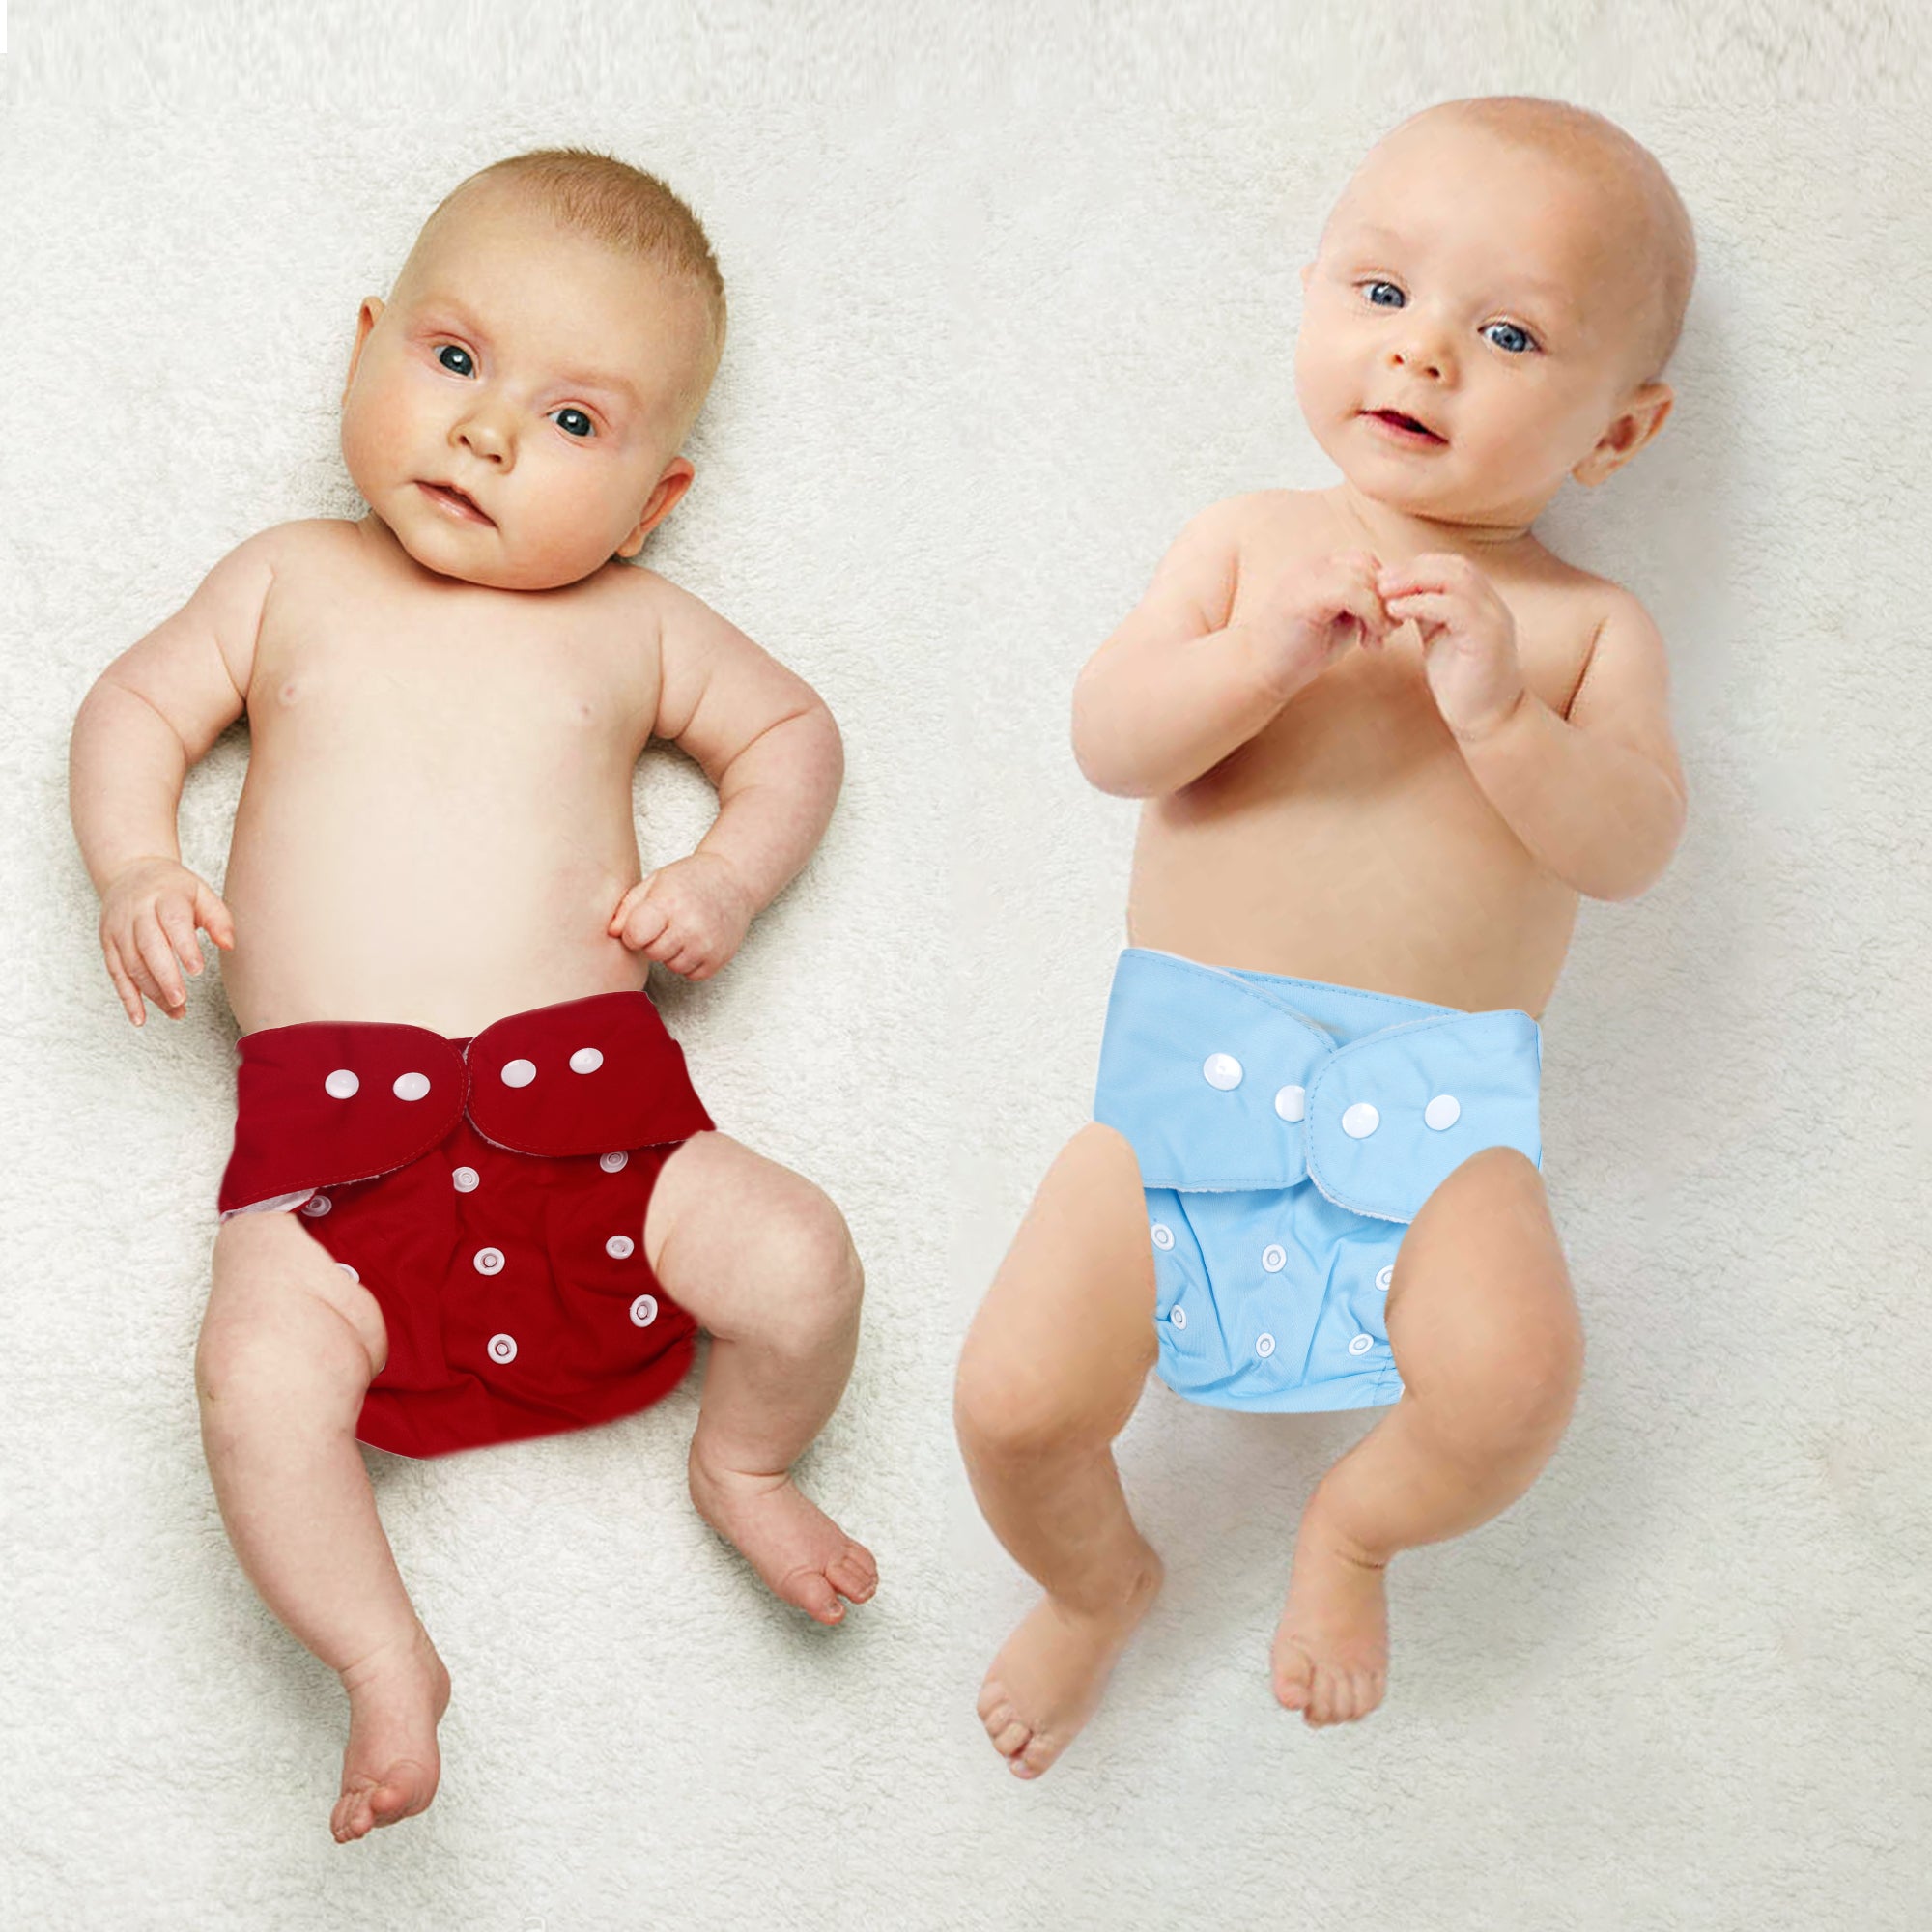 Plain Red And Blue Reusable 2 Pk Diaper - Baby Moo